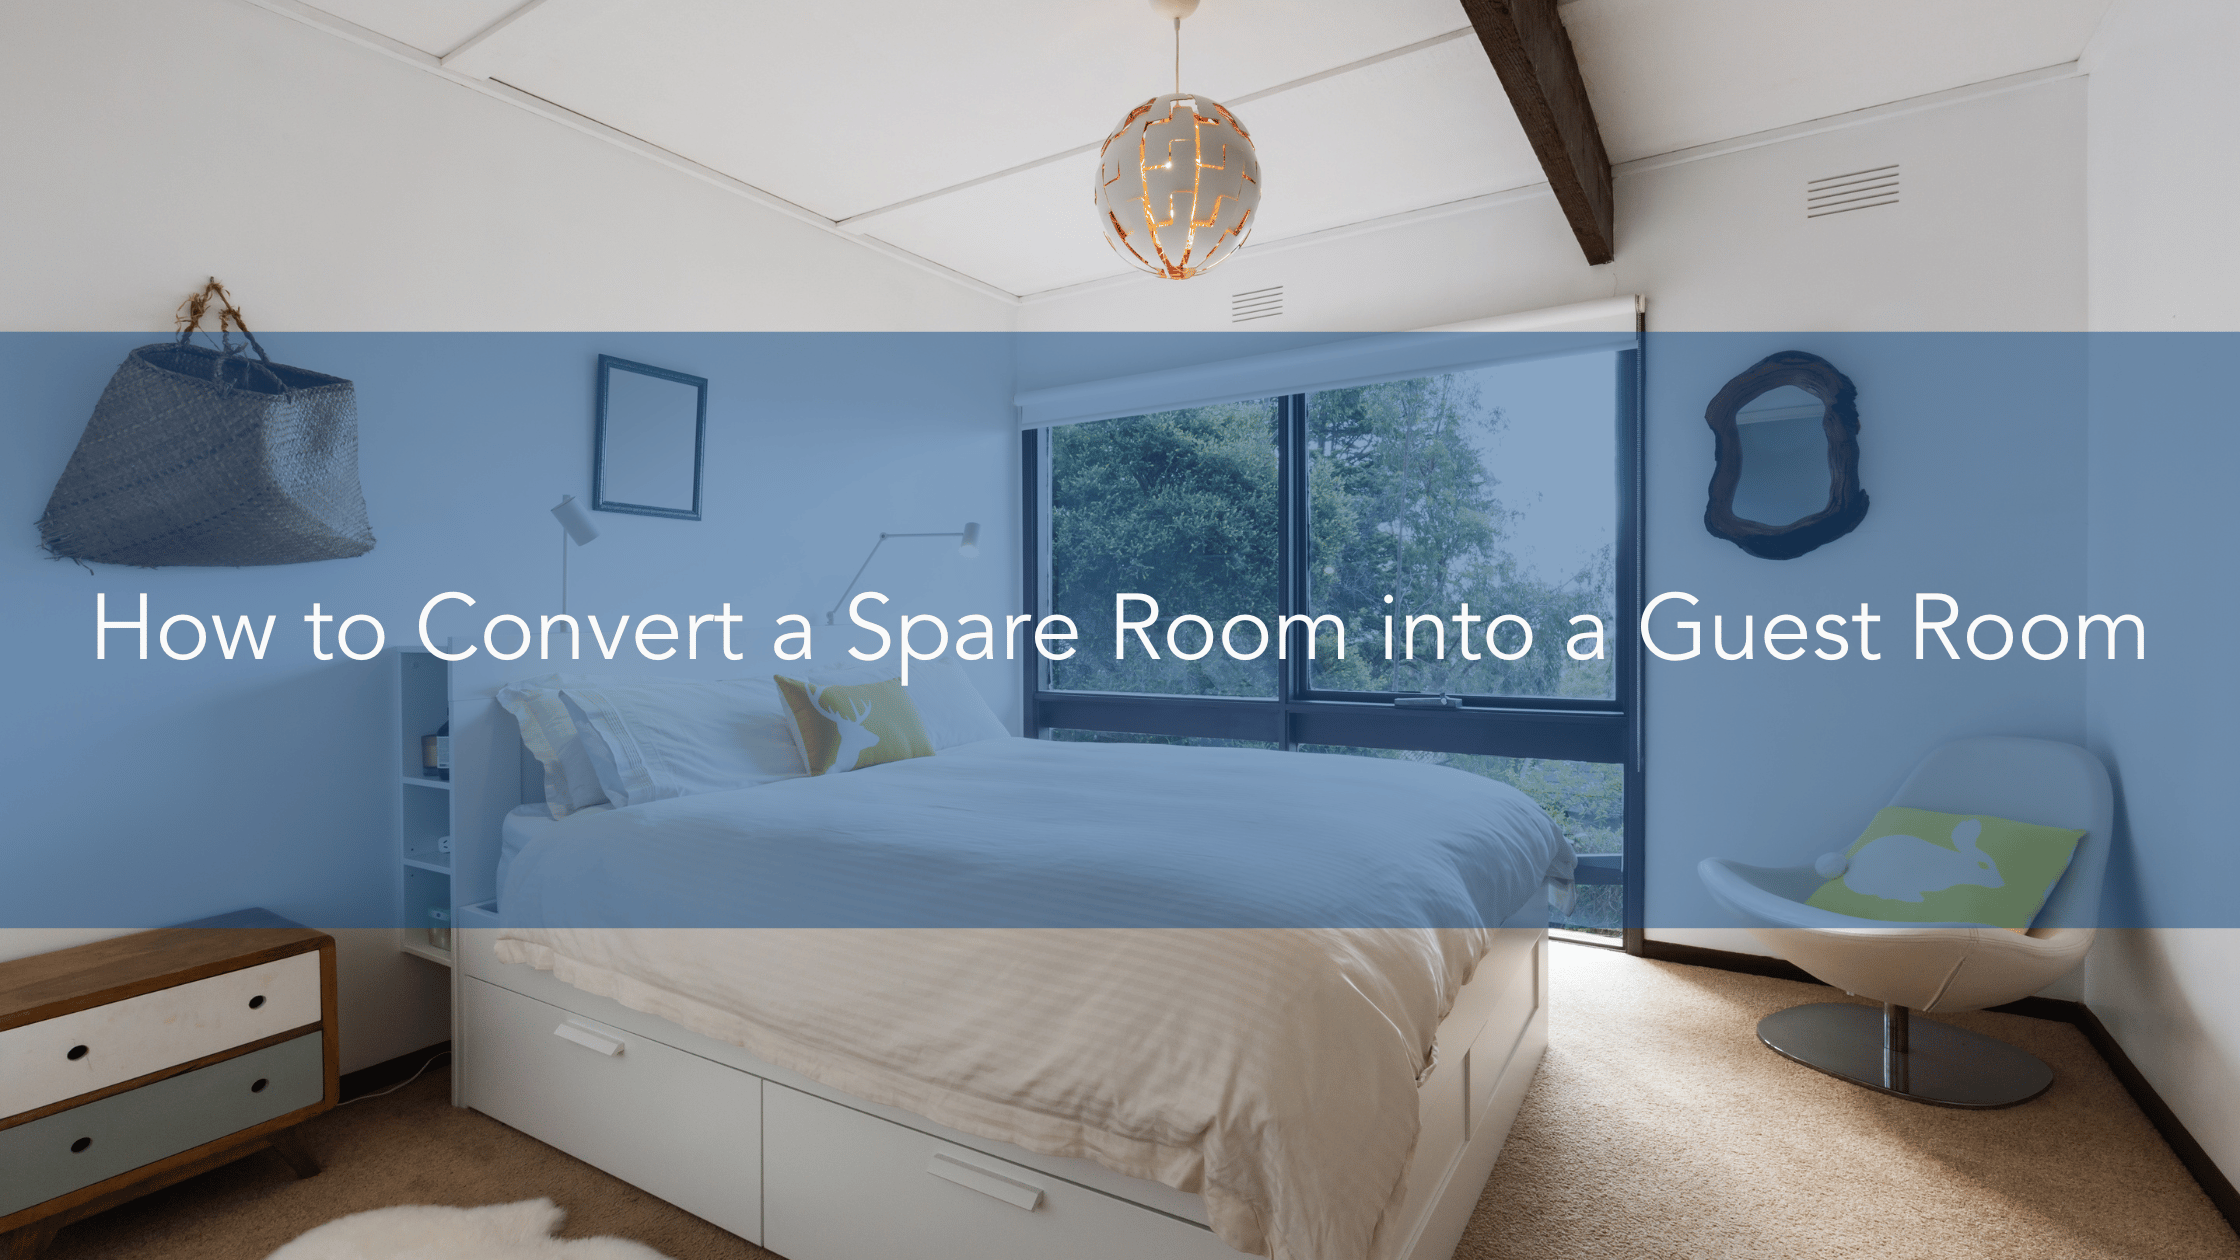 https://雷竞技下载链接官网appwww.explorizers.com/wp-content/uploads/2022/11/How-to-Convert-a-Spare-Room-into-a-Guest-Room.png